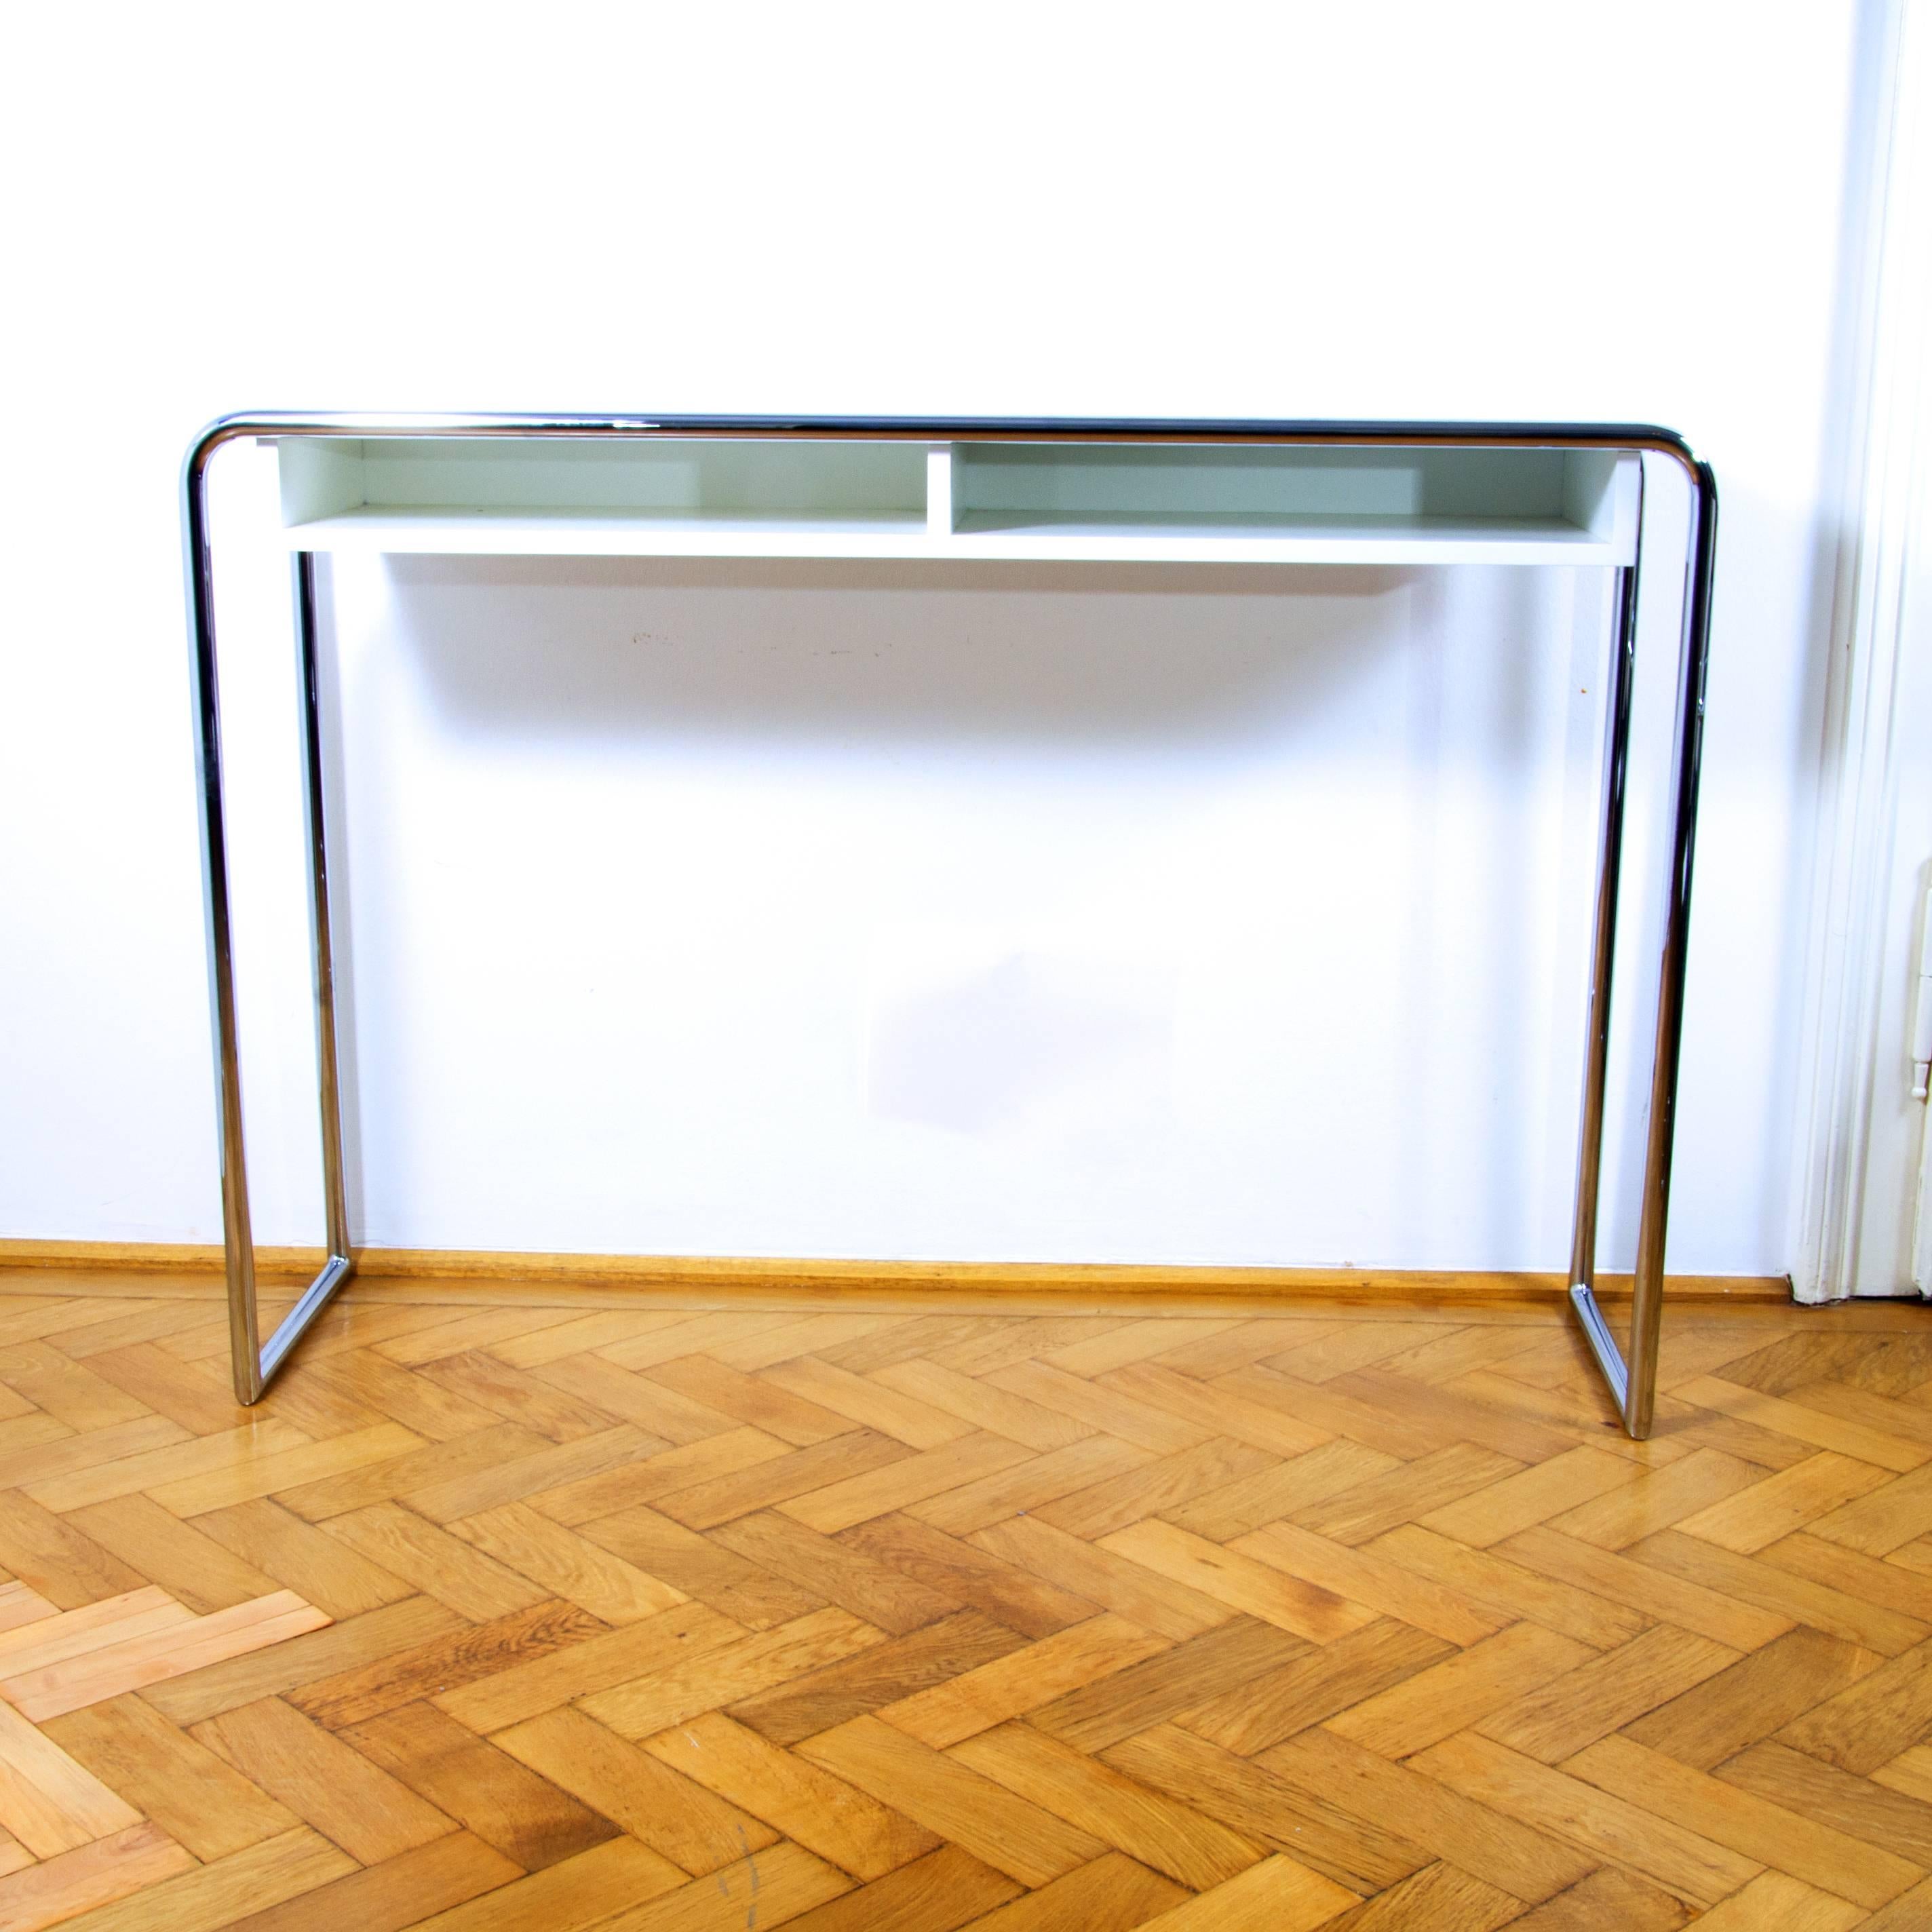 Beautifully designed elegant console table B 108 with compartment by Thonet. The design dates back to the year 1930/31 and was first presented in Thonet’s catalog of that year. 
The invention of tubular steel furniture is very closely connected to